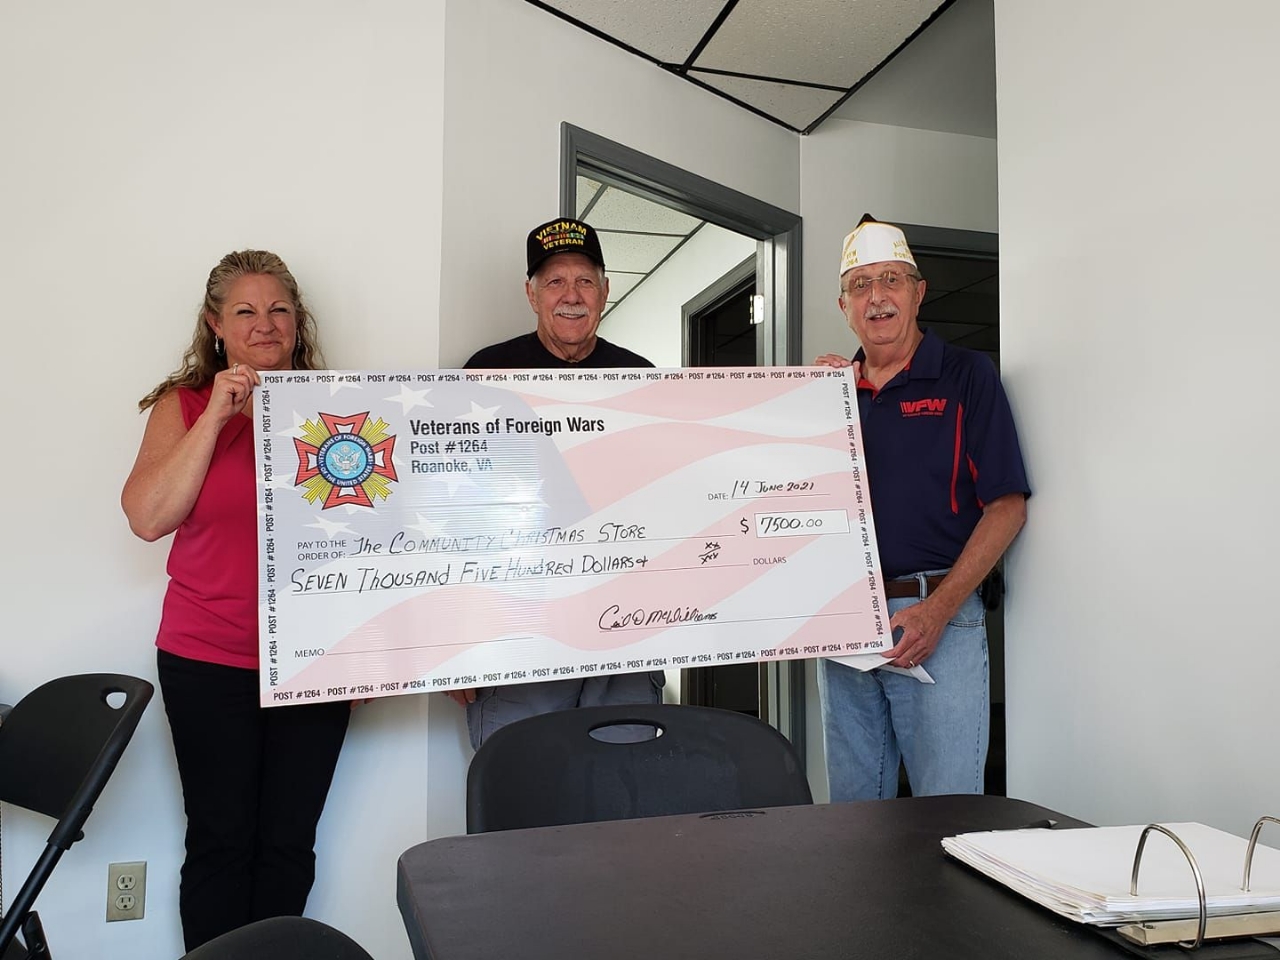 The VFW was Proud to support the Roanoke Valley Community Christmas Store. Presenting a Check for $7500.00 was Trustees. Nolan Jackson and Commander Cecil McWilliams. The VFW supports Veterans and our Community.